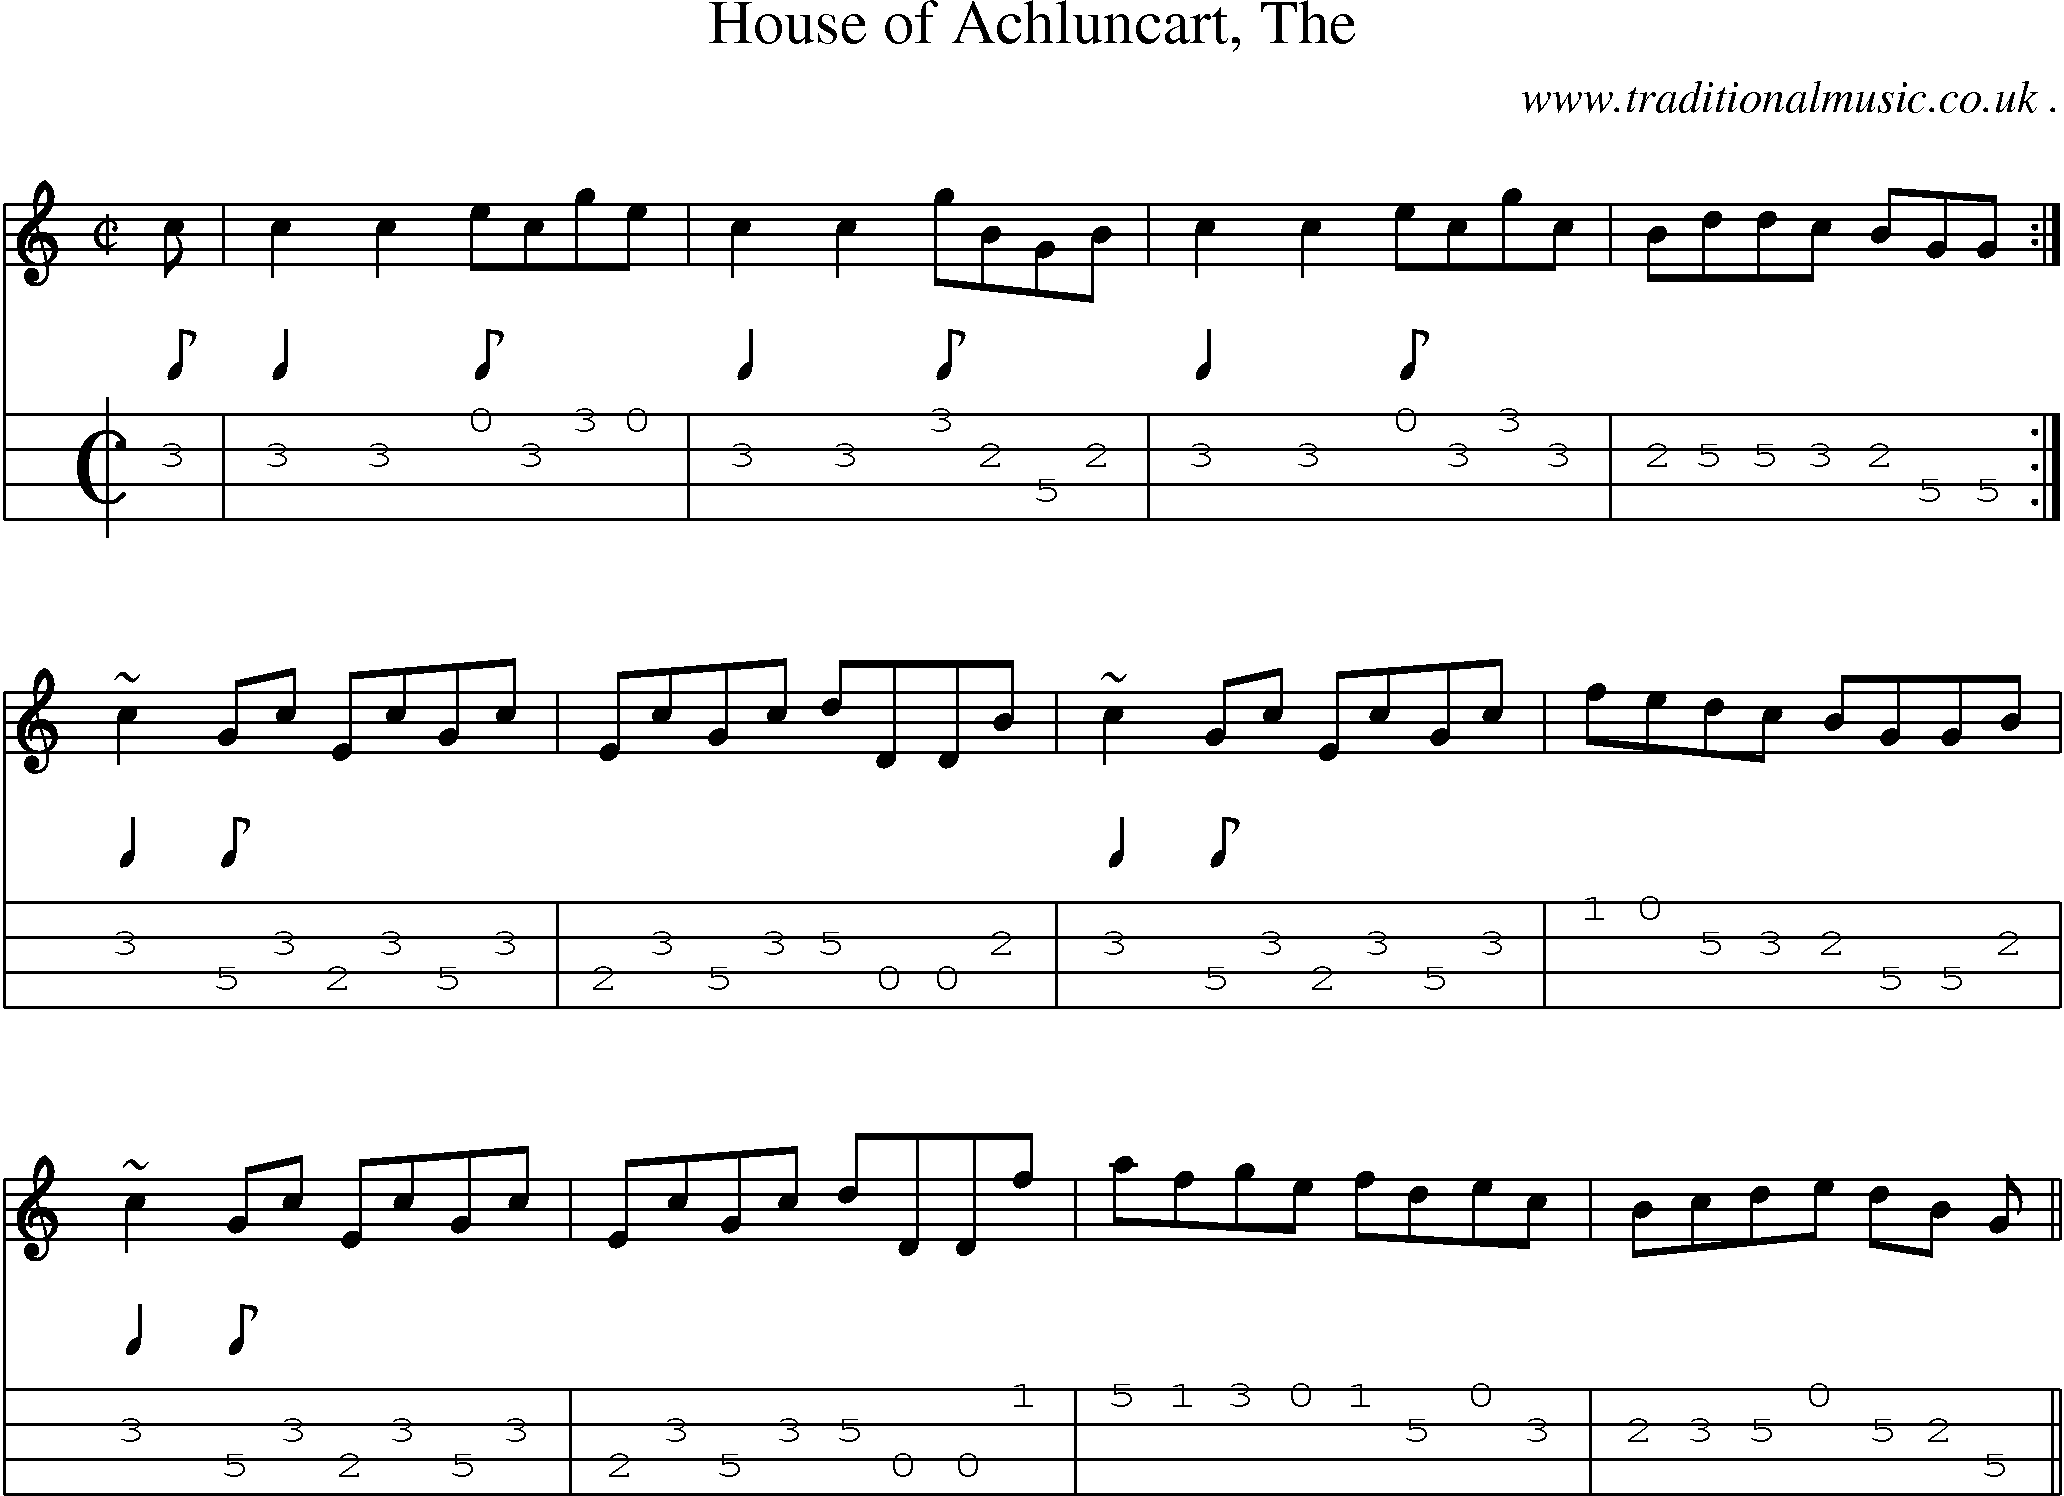 Sheet-music  score, Chords and Mandolin Tabs for House Of Achluncart The